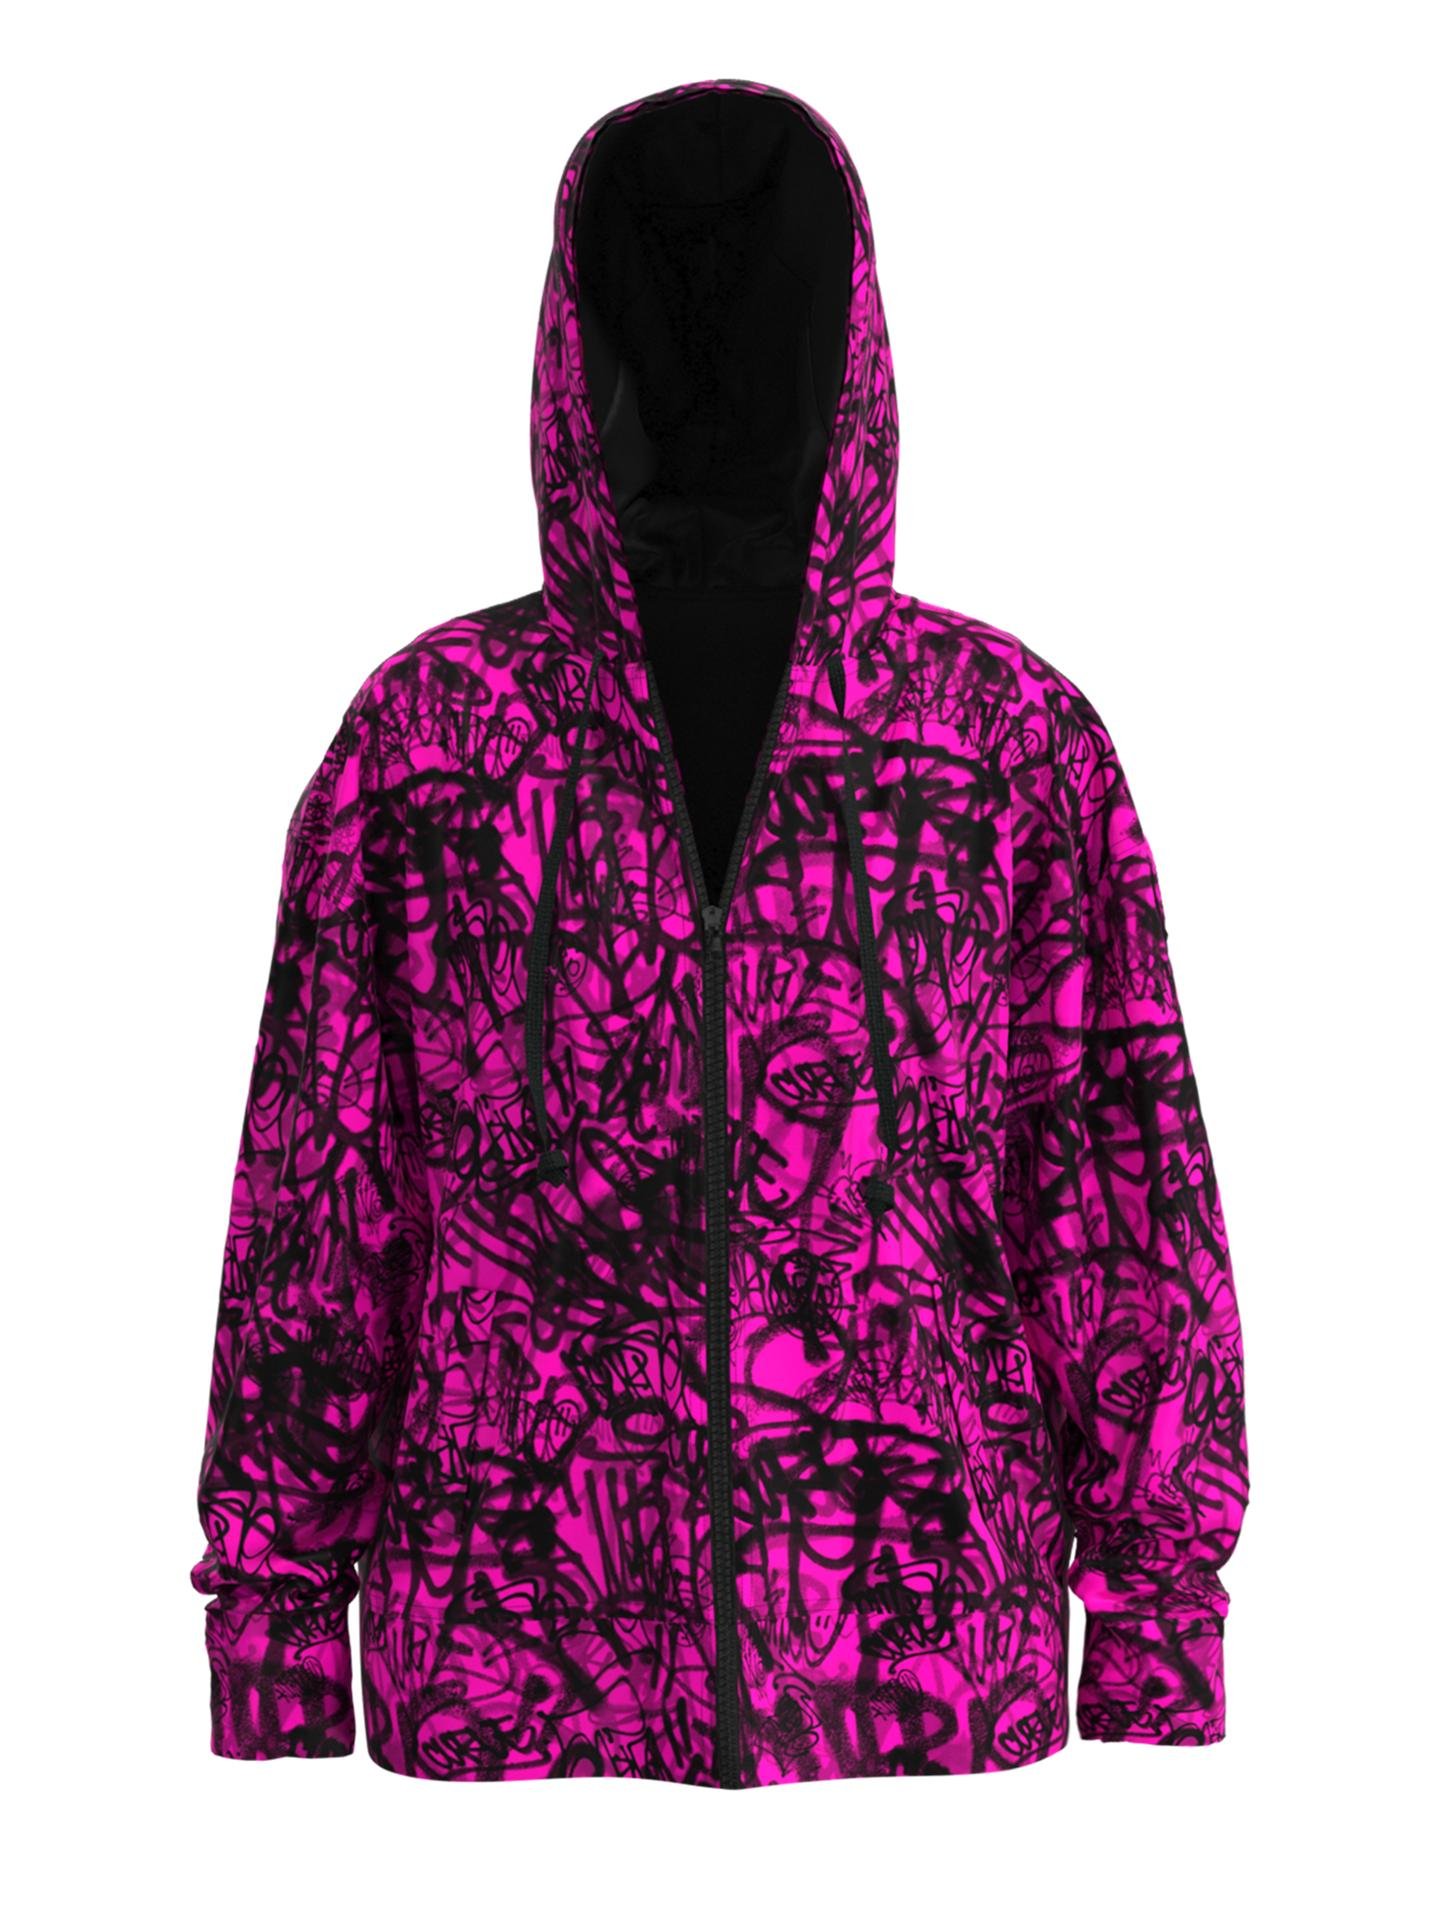 The James Hoodie - Curvazoid Magenta (Unisex) by ASSEMBLY.FASHION NYFW 2021 DROP NO.01